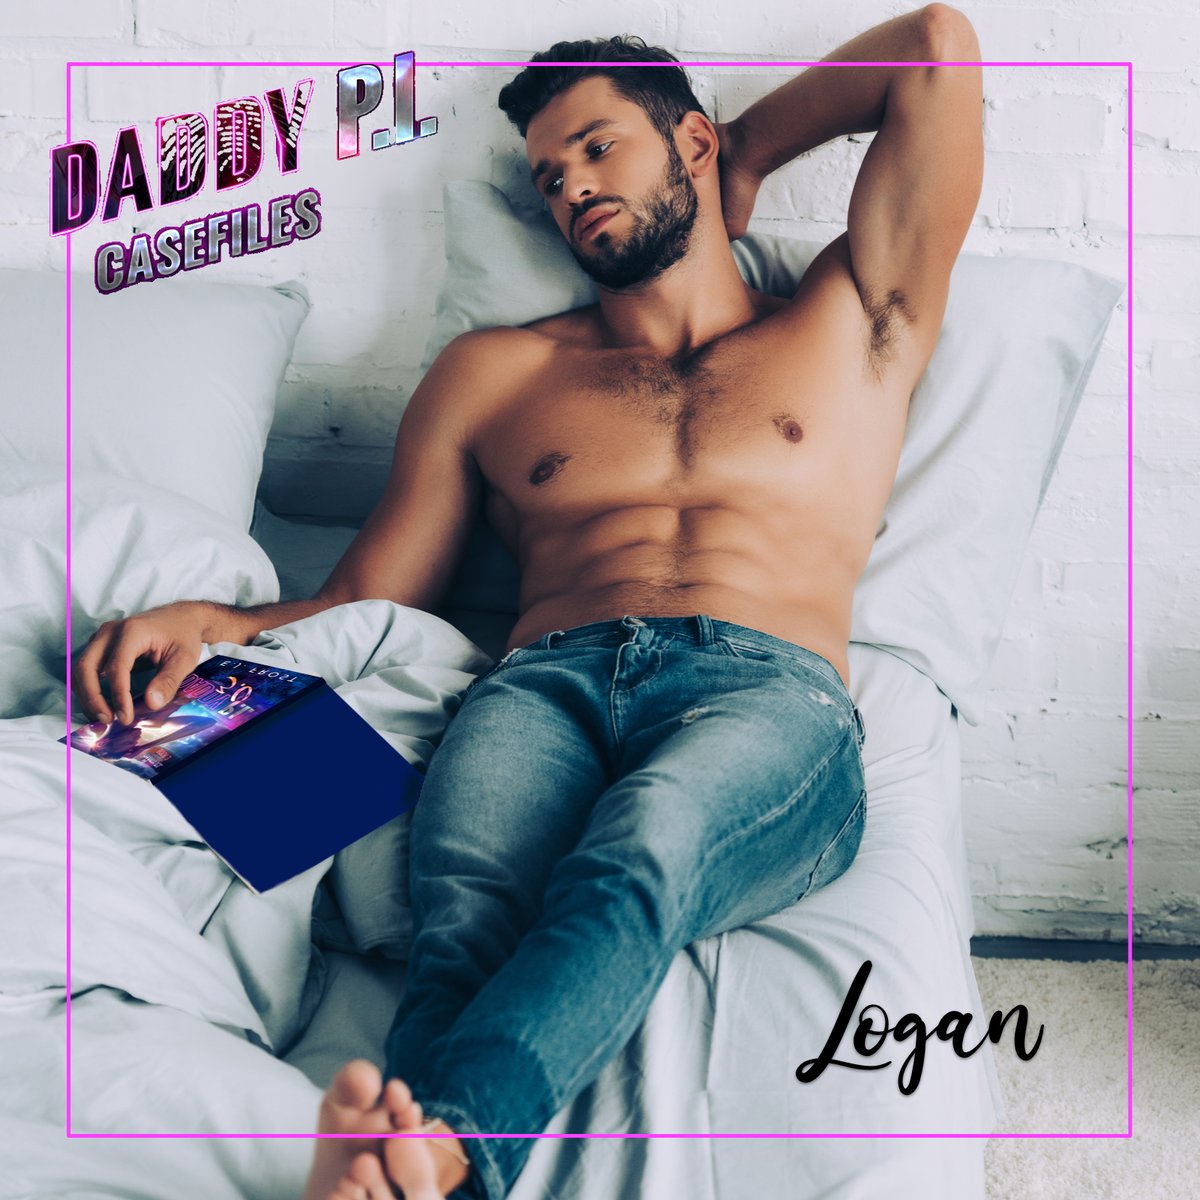 While Daddy laces up one sleeve, I sneak my black cat ears off the dresser and slide them into my curls. 
He chuckles. “That’s how it’s going to be today, huh, little girl?”
I nod. “It’s a cat ears kind of day, Daddy.”

books2read.com/daddypi3 
#daddydombooks #romance